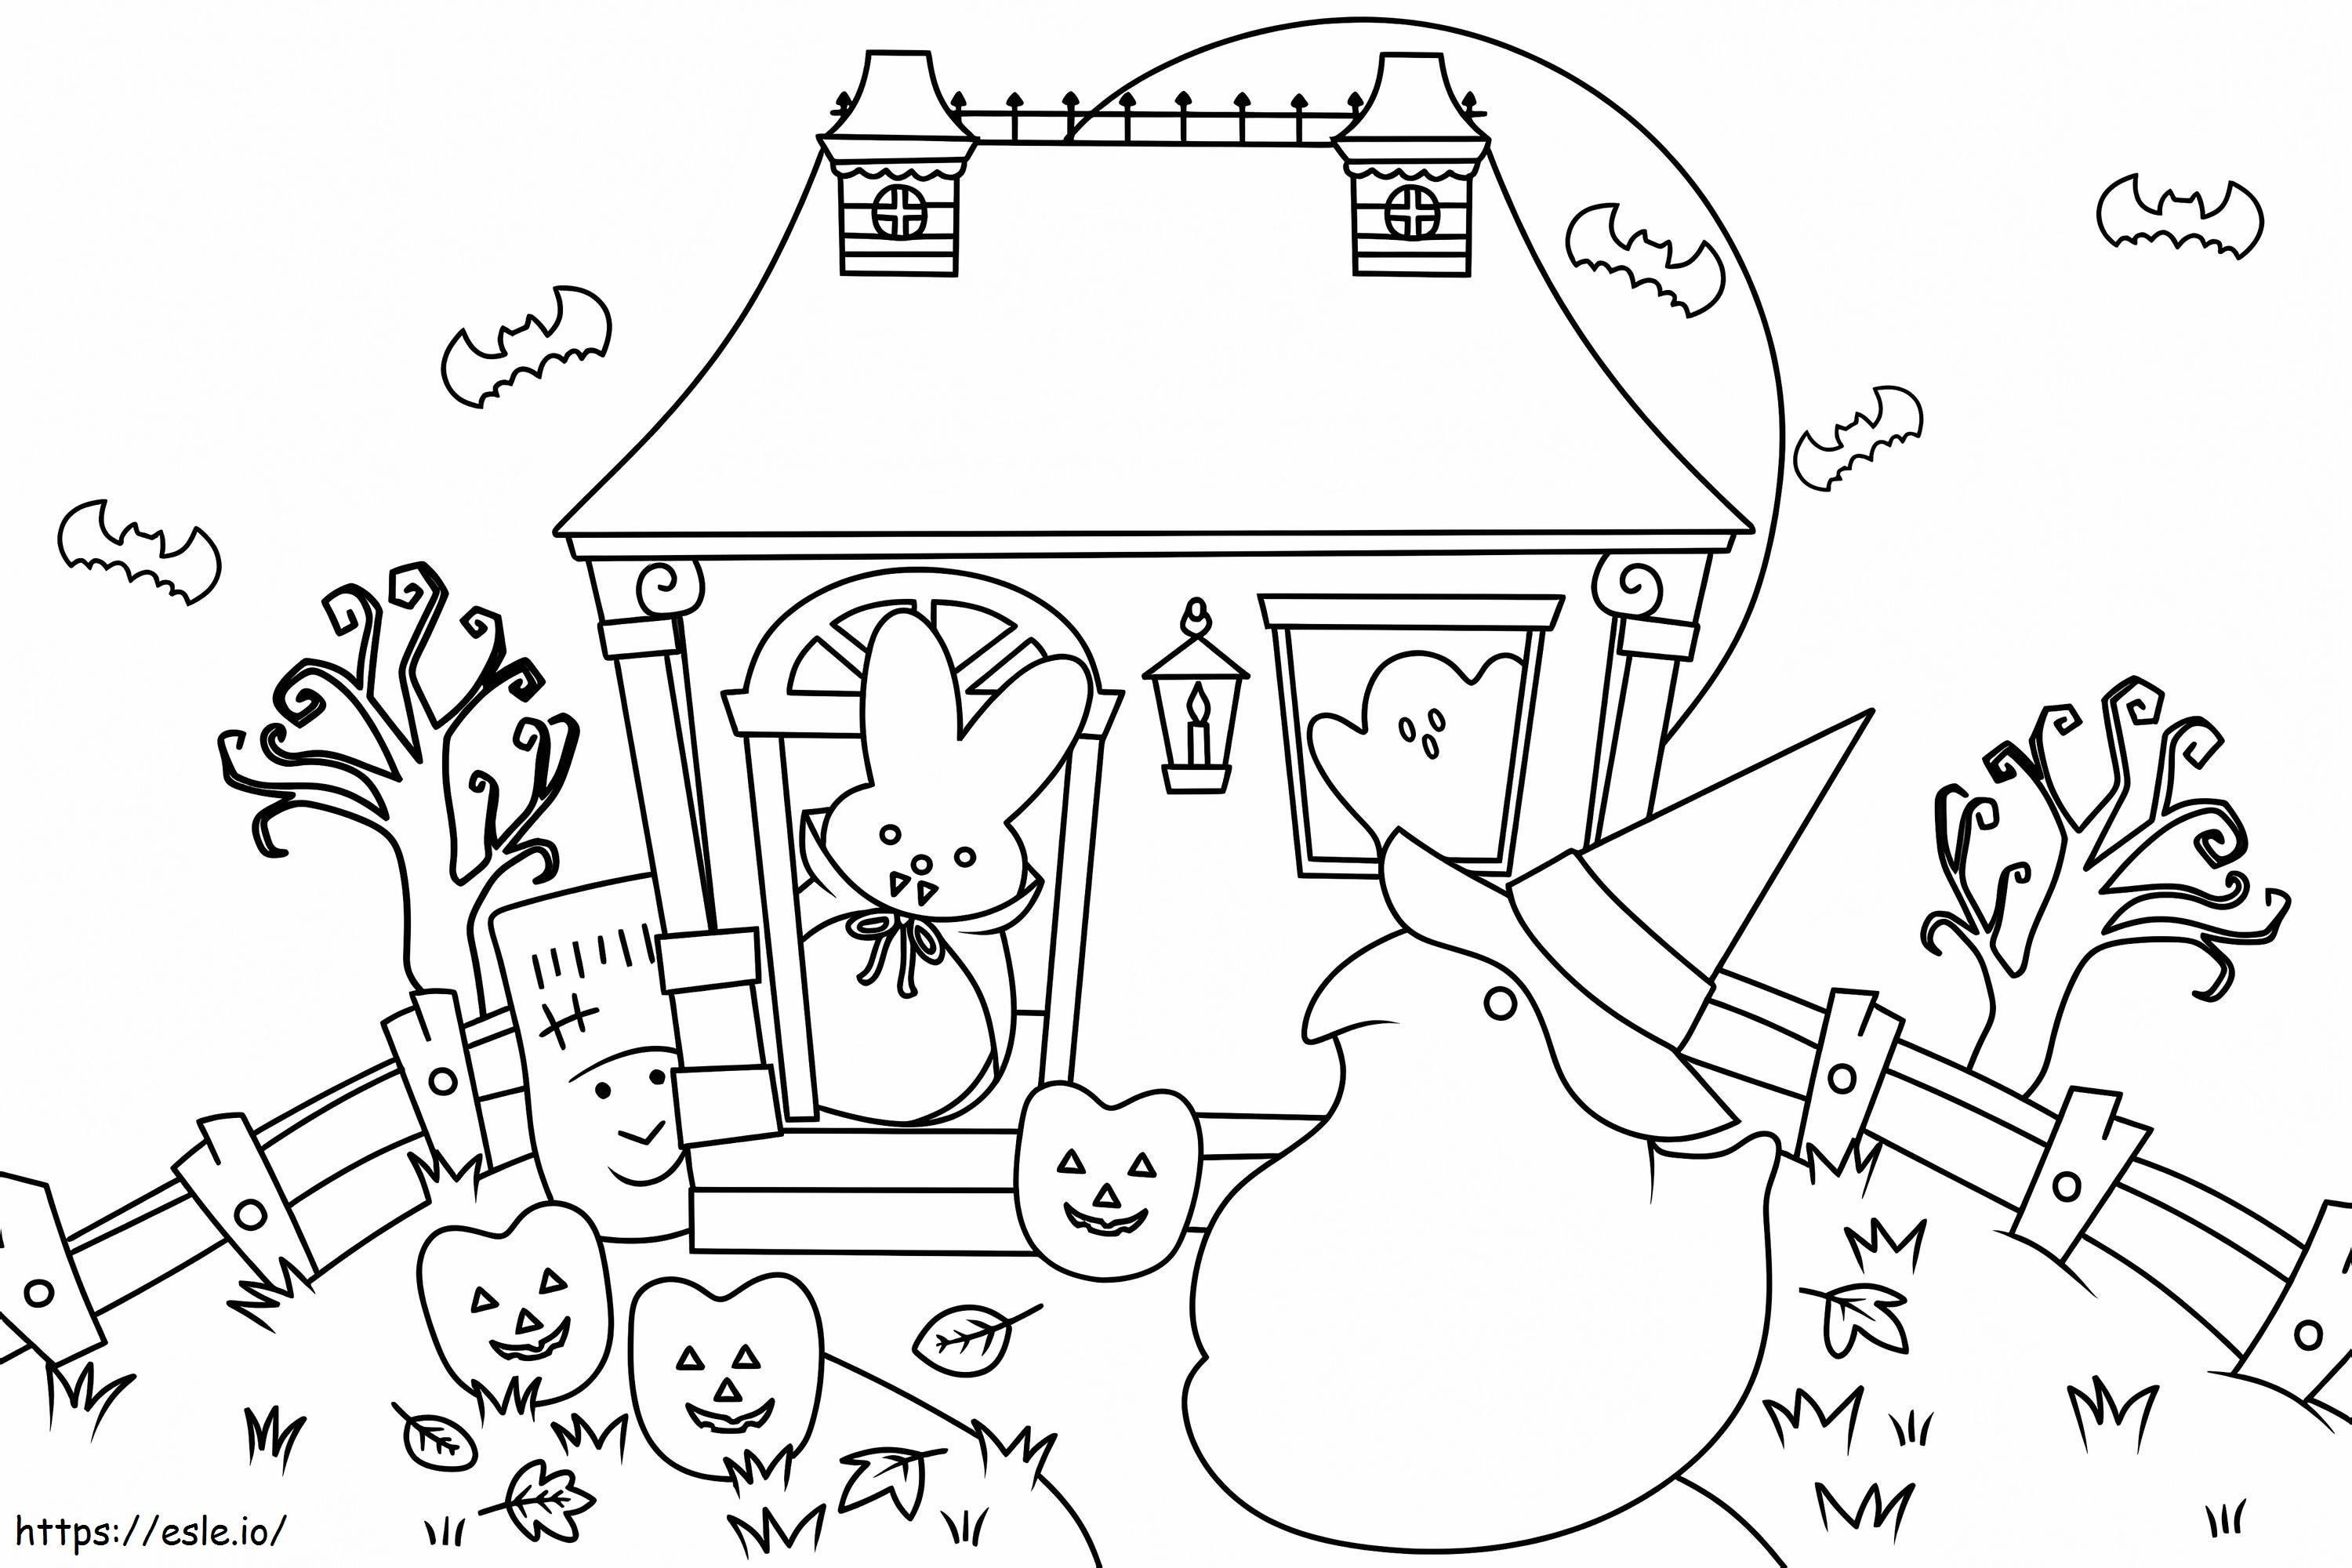 Marshmallow Peeps Halloween coloring page